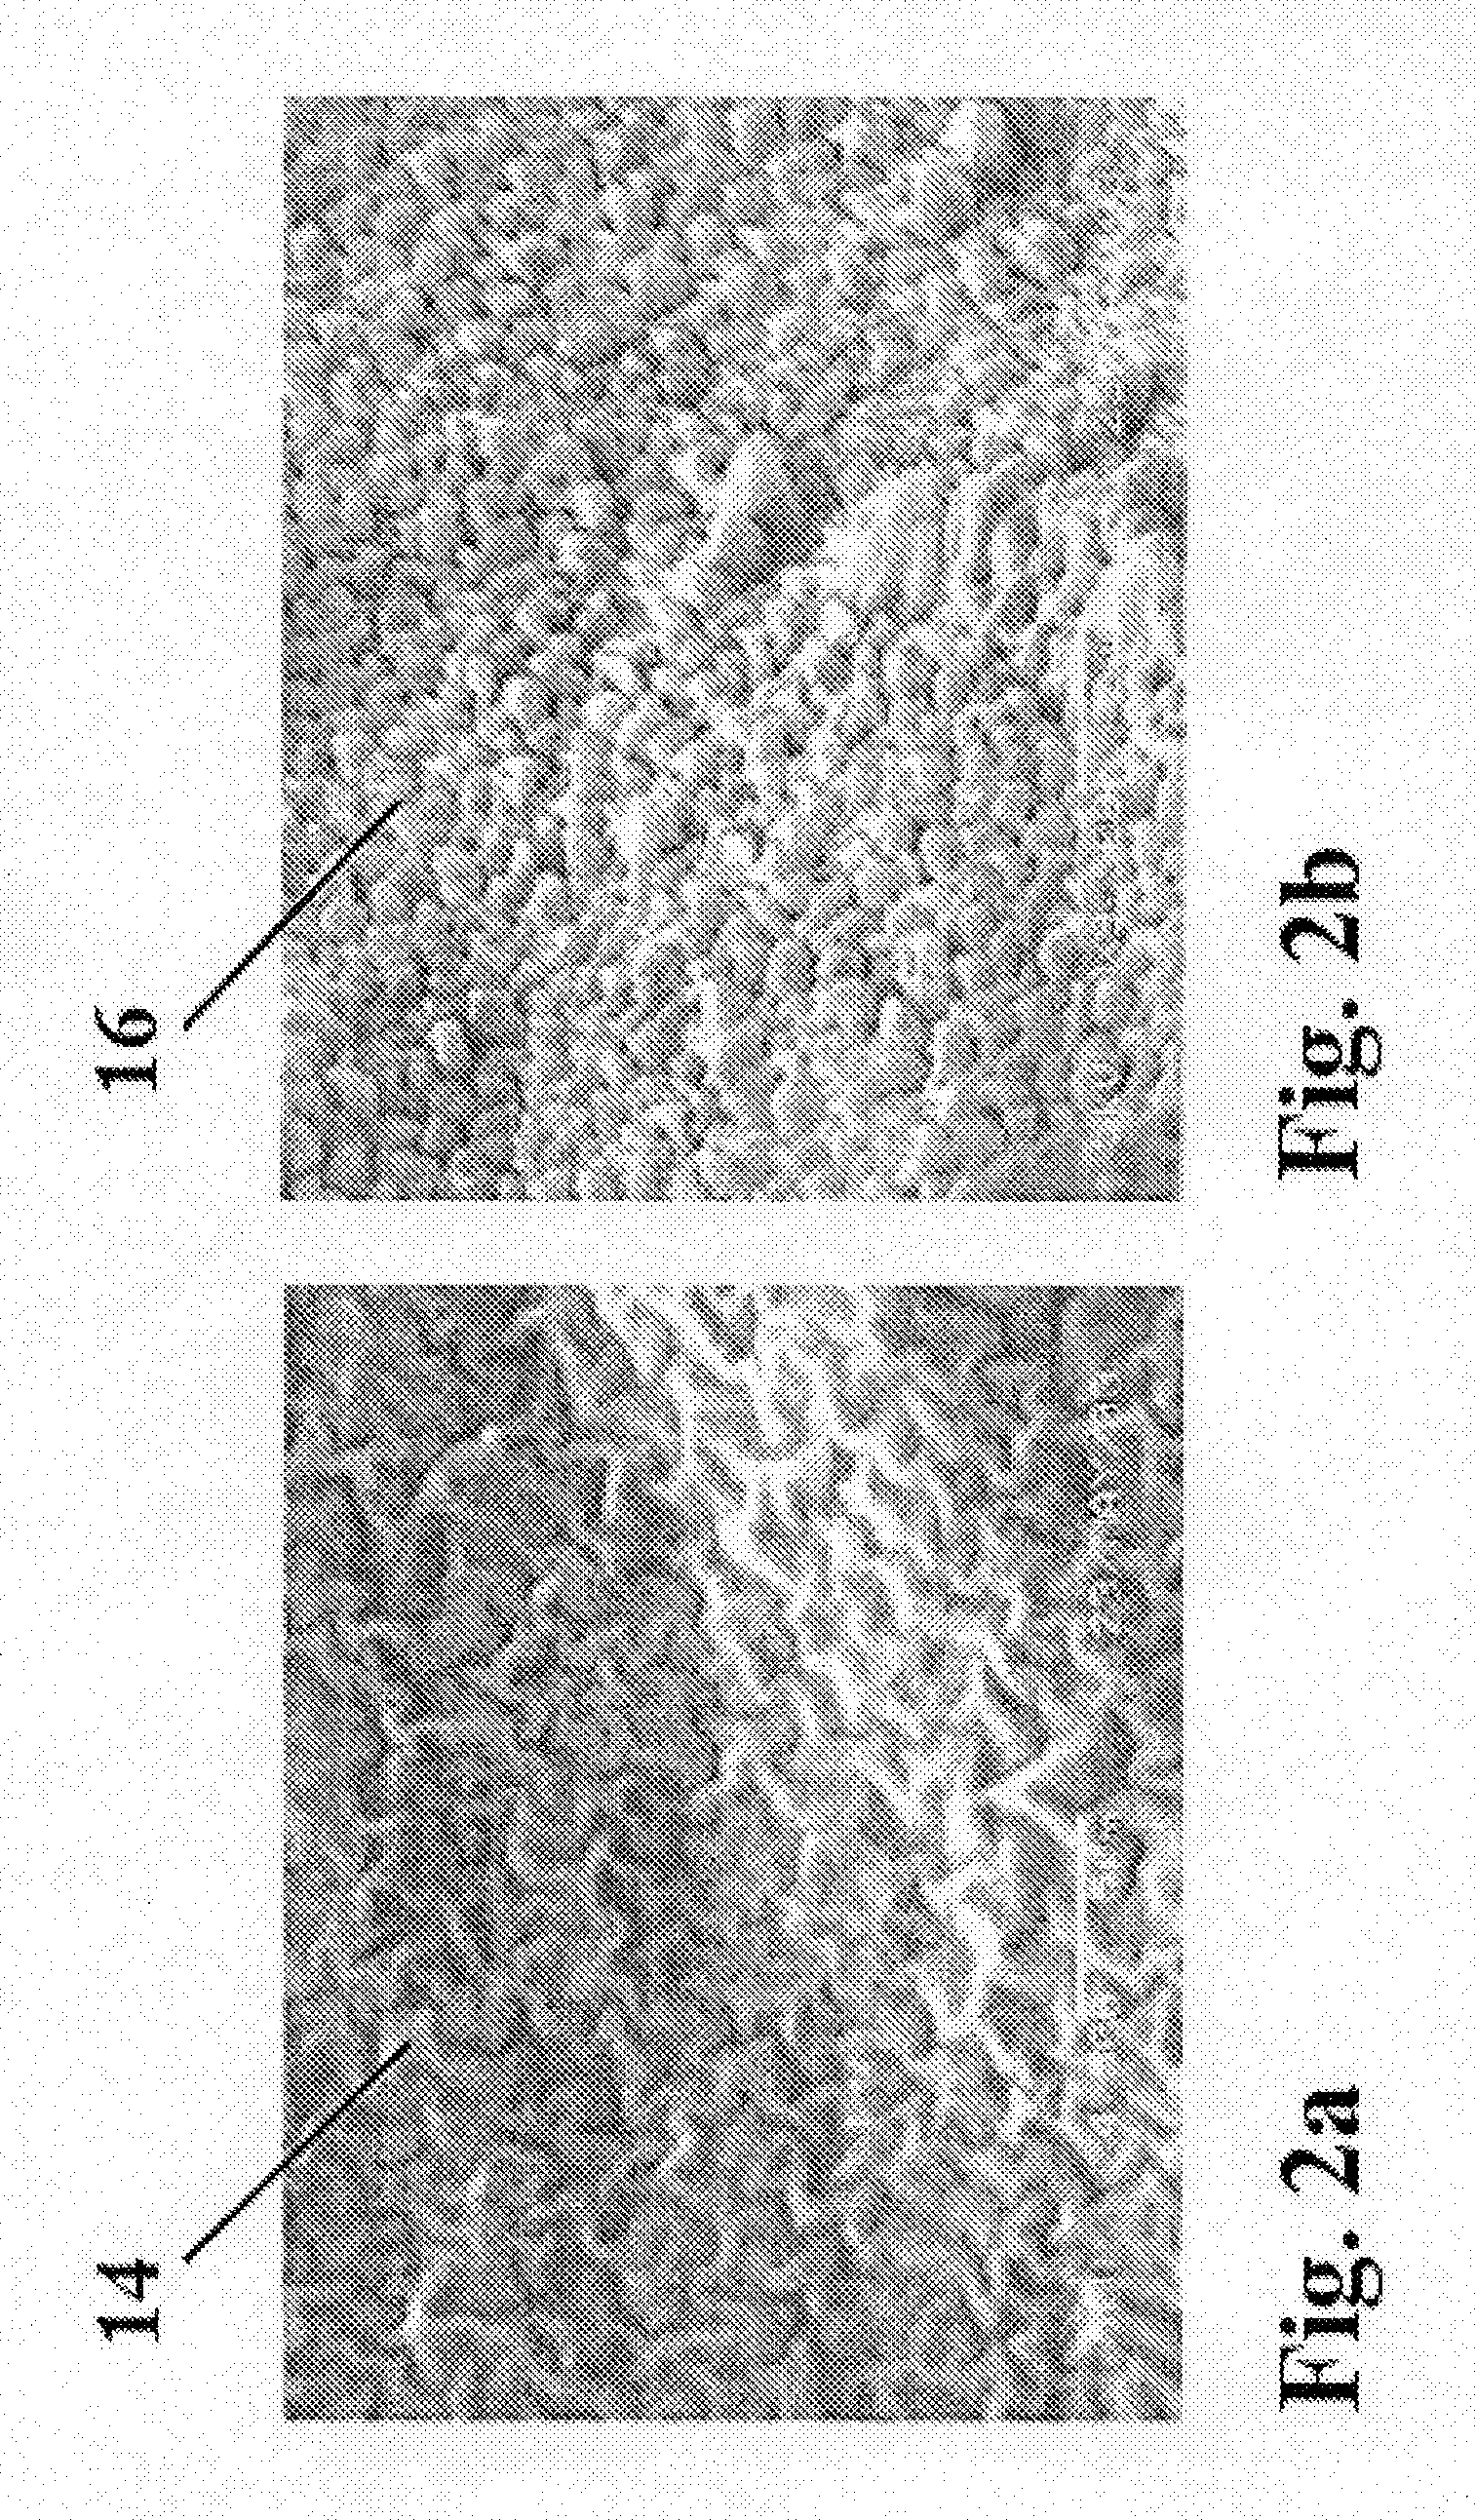 Method of utilizing MEMS based devices to produce electrospun fibers for commercial, industrial and medical use